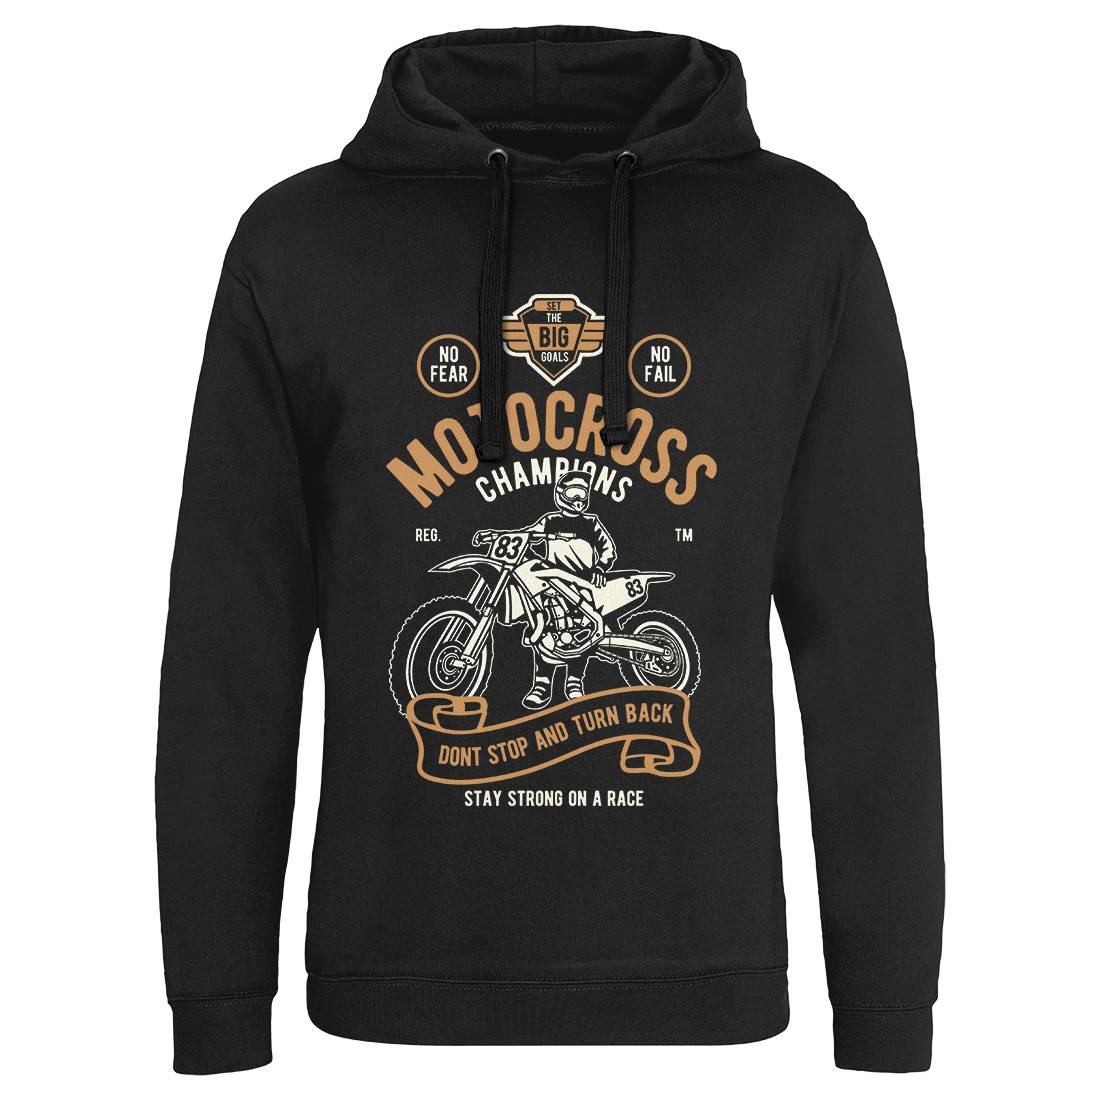 Motocross Champions Mens Hoodie Without Pocket Motorcycles B230